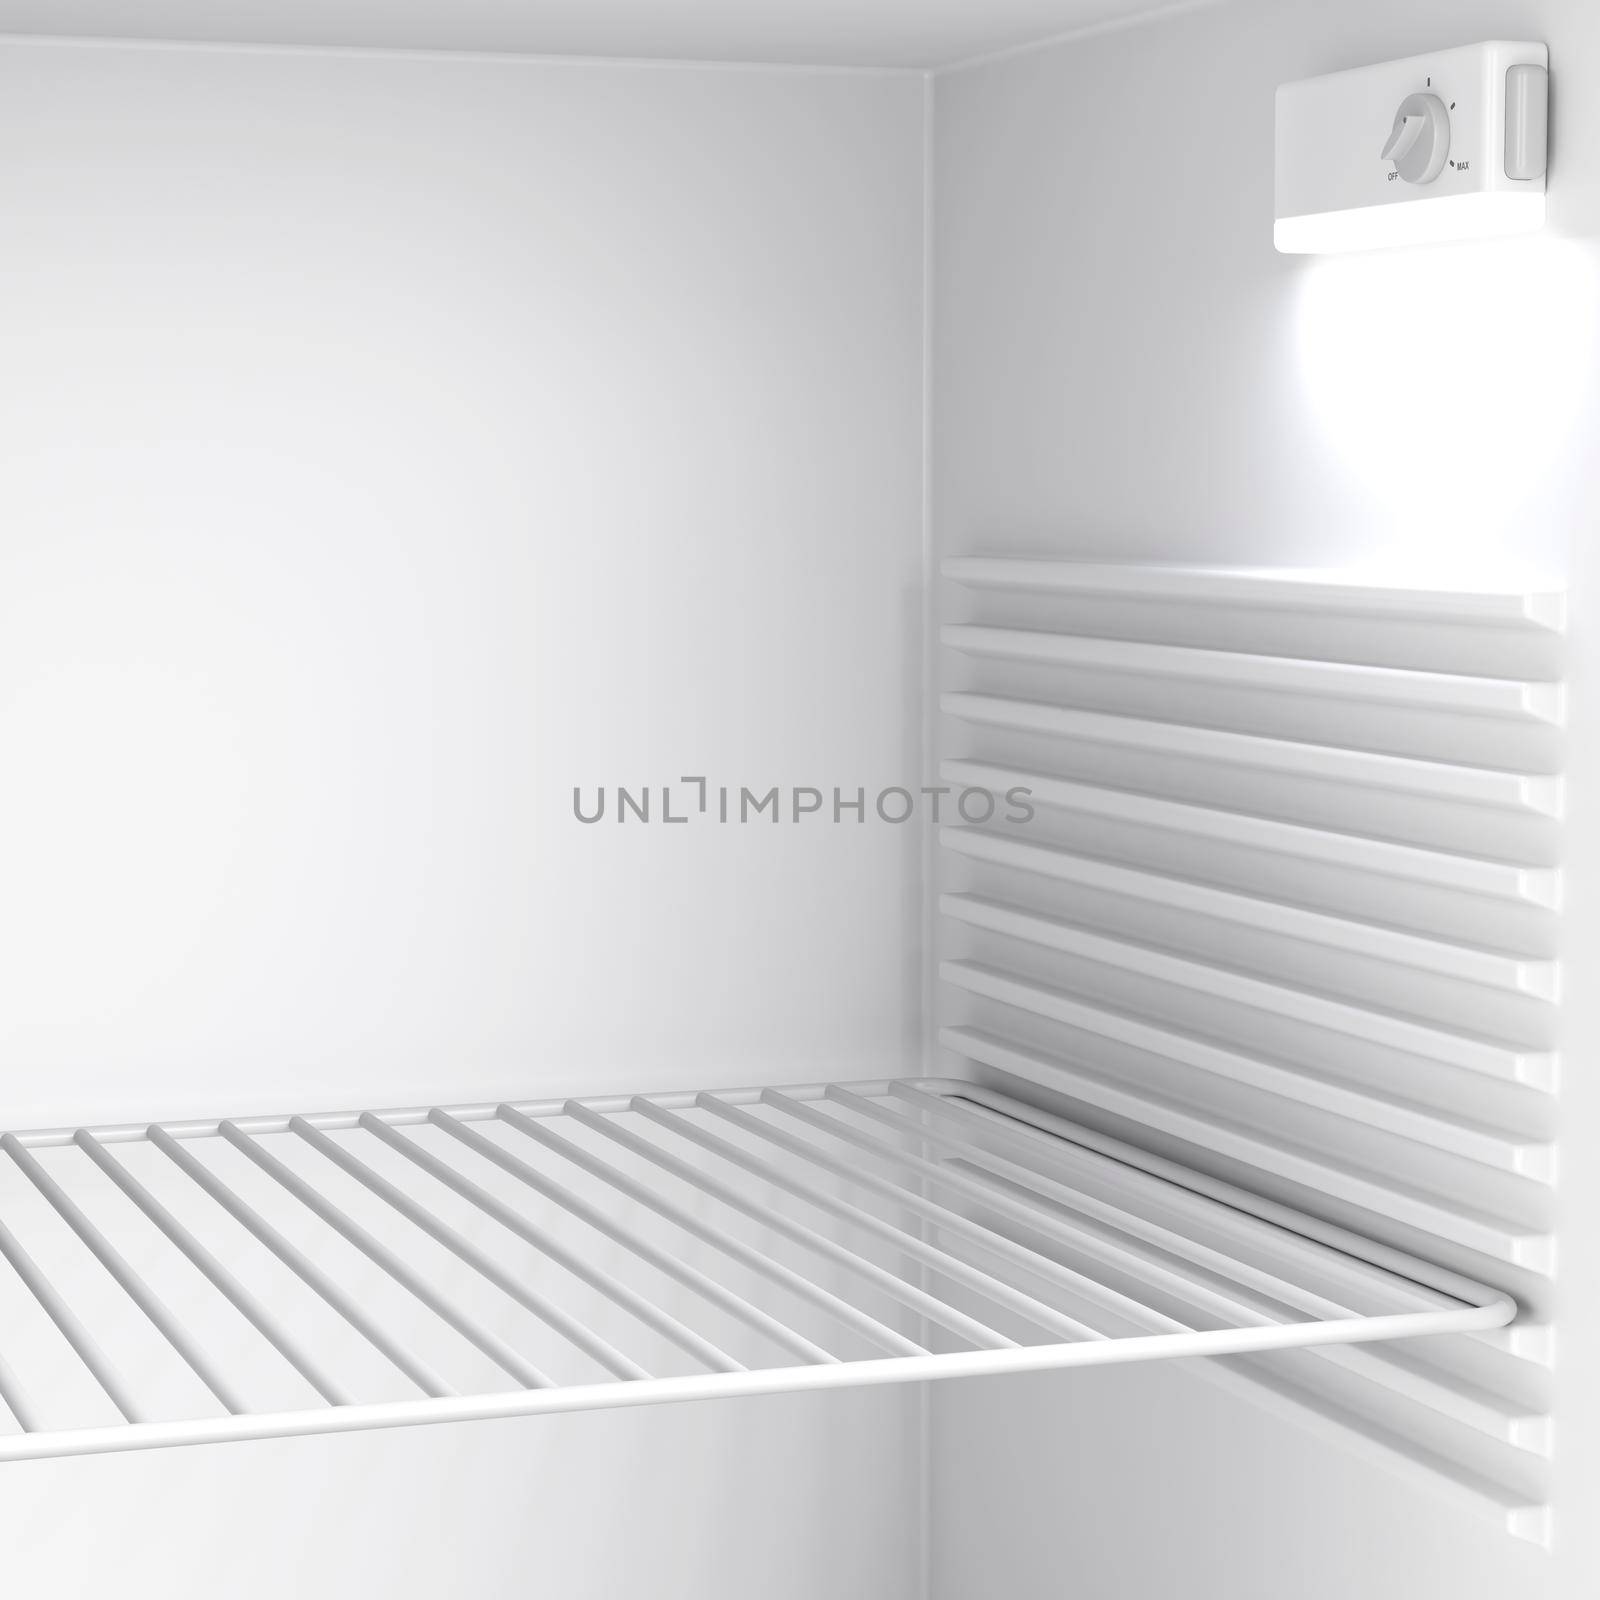 Empty minibar refrigerator inside by magraphics